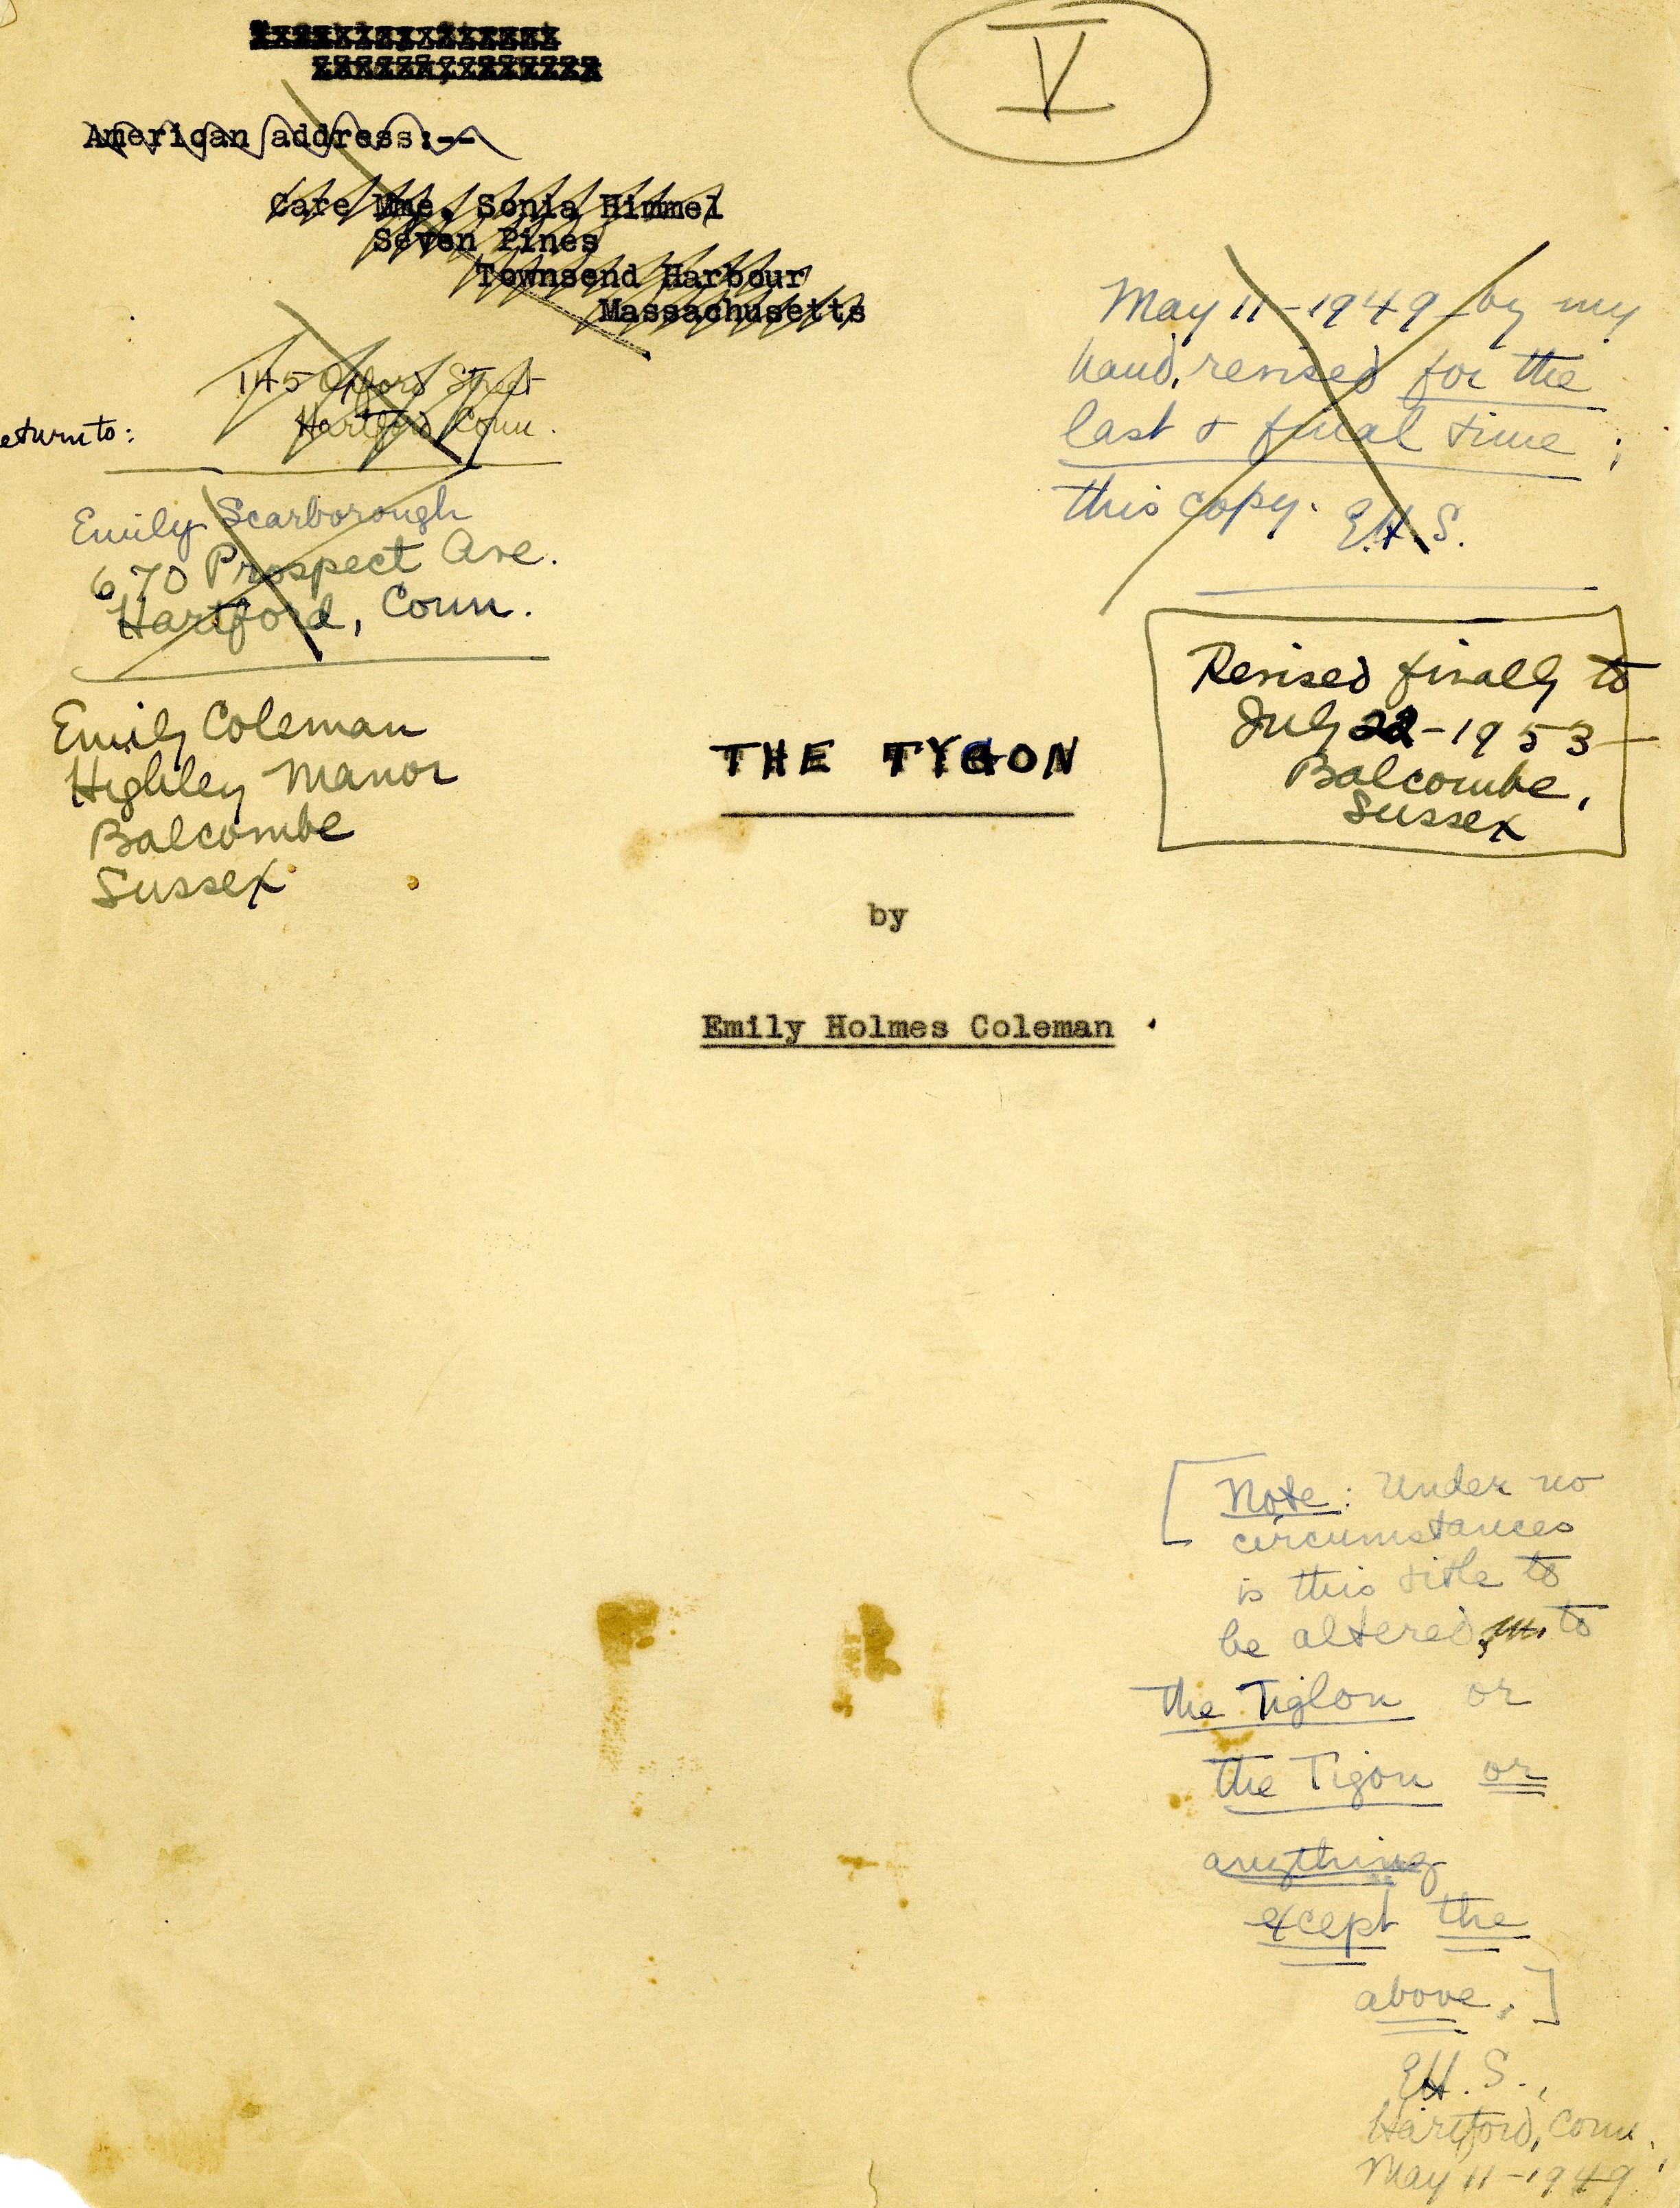 Coleman, Emily. “The Tygon: MS V, revised finally to July 22, 1953 – Balcombe, Sussex,” 1953 (title page), from the Emily Holmes Coleman papers